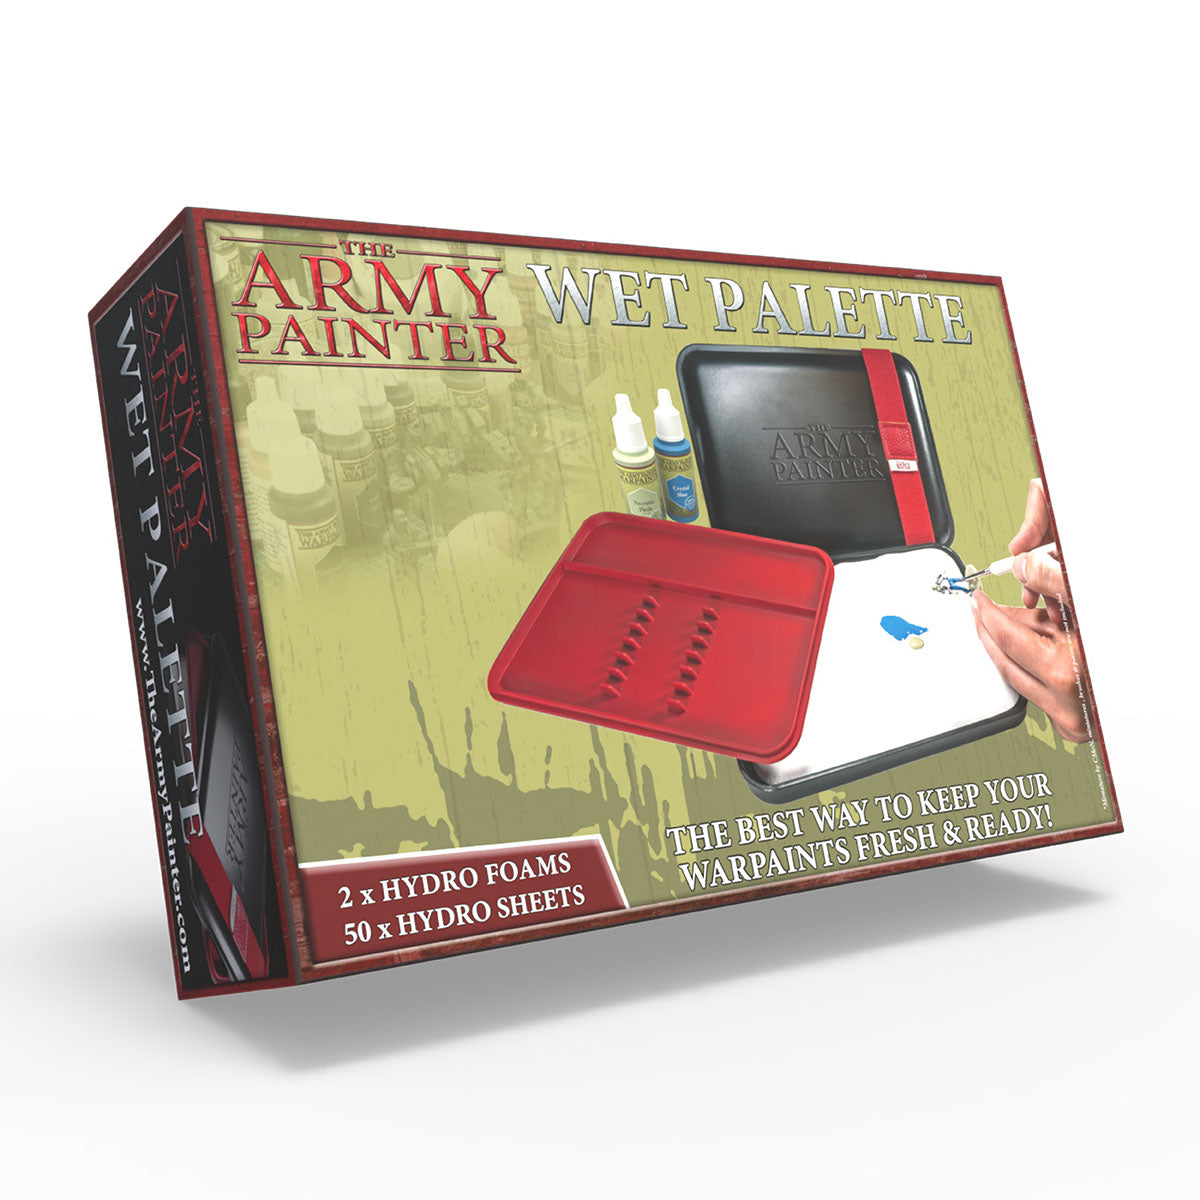 ARMY PAINTER Wet Palette Hydro Pack | Impulse Games and Hobbies